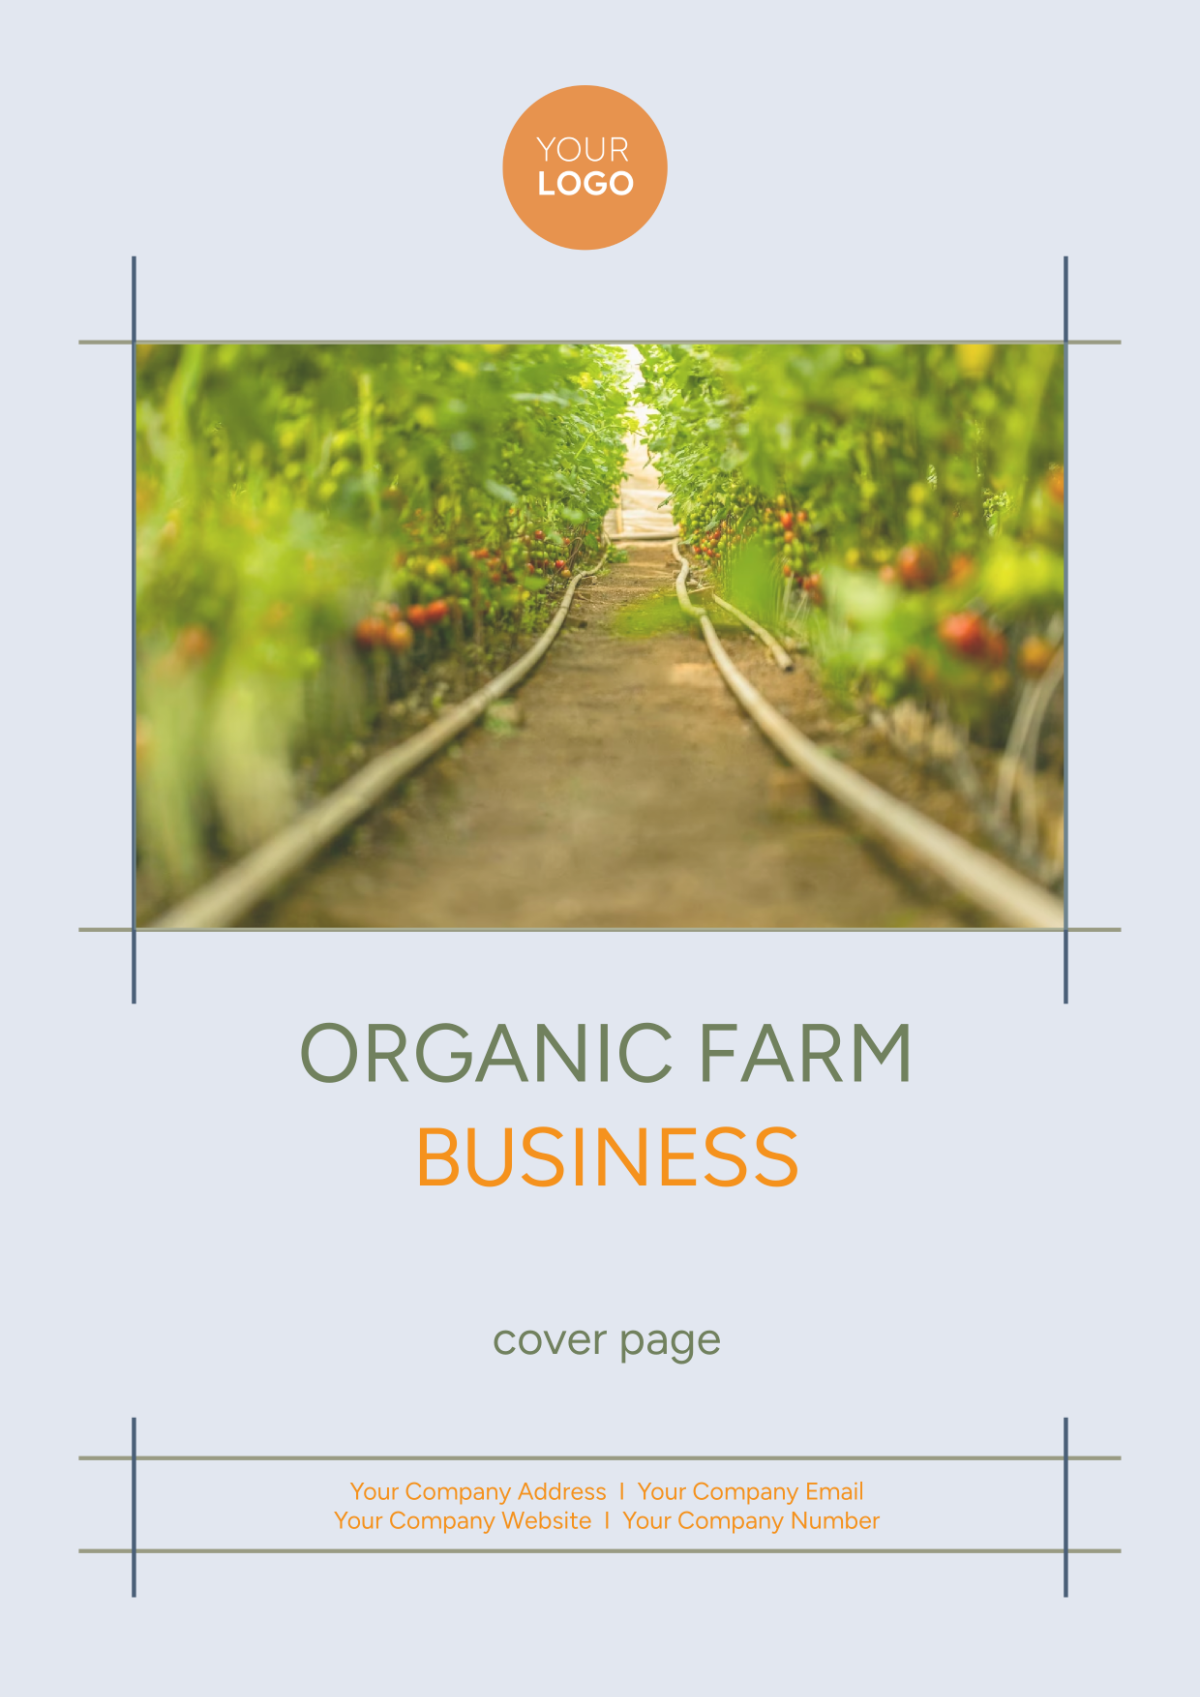 Organic Farm Business Cover Page